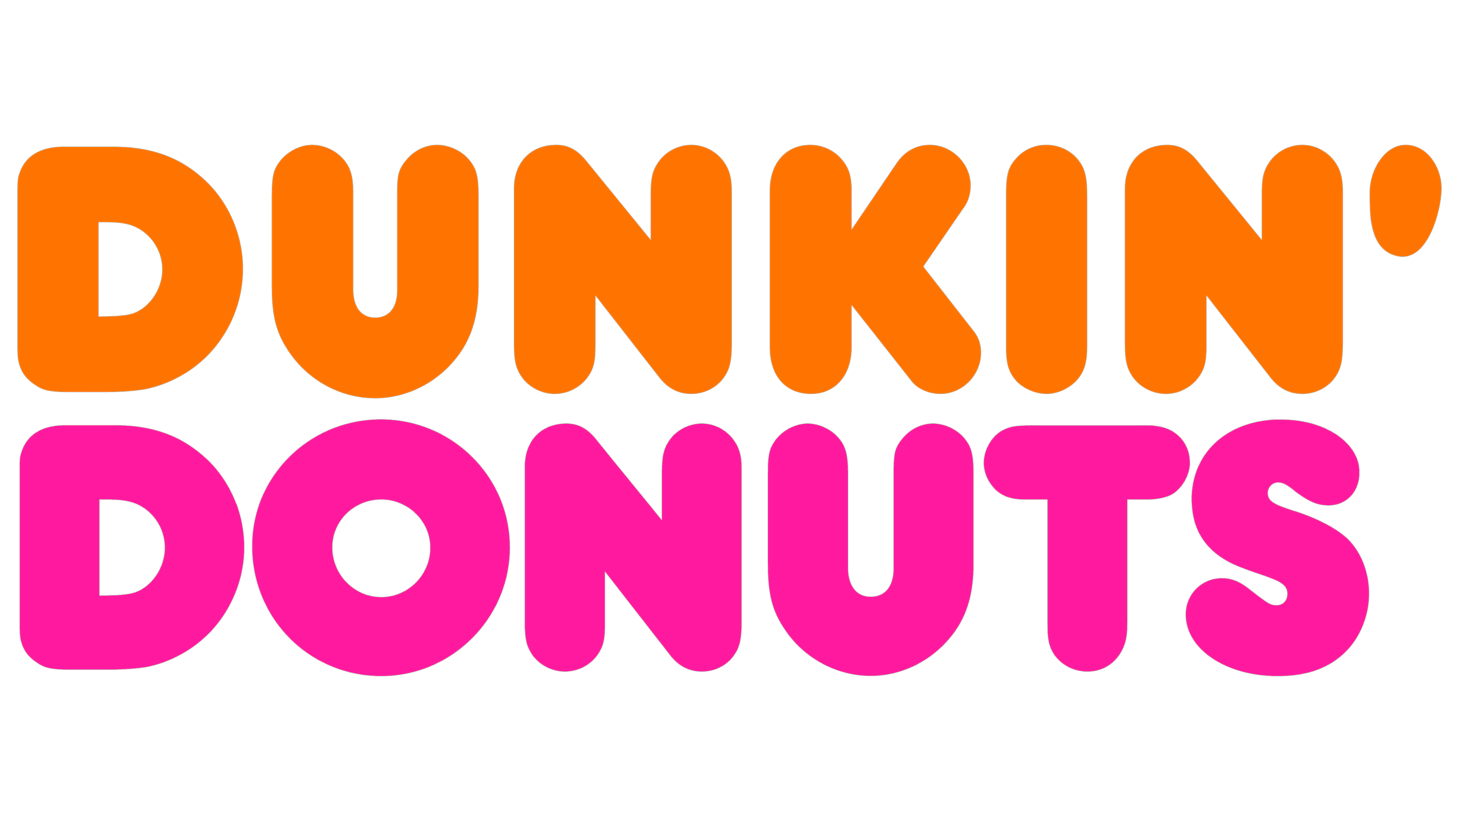 Dunkin donuts sign 1976 2002